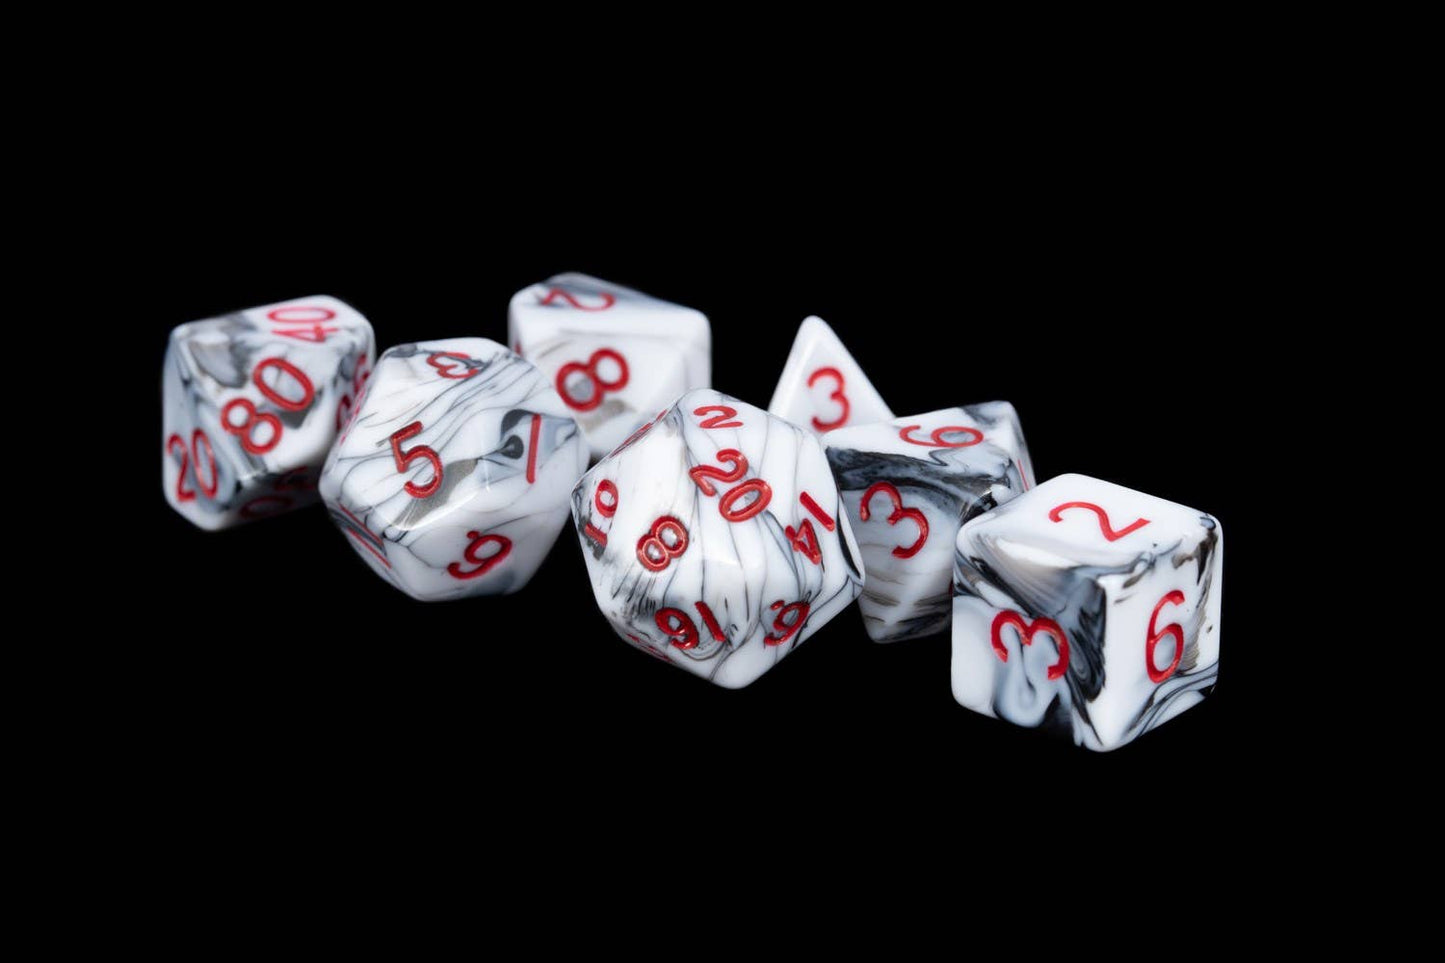 16MM Dice Set Pink/Black With Gold Numbers Marble Pattern  (173)